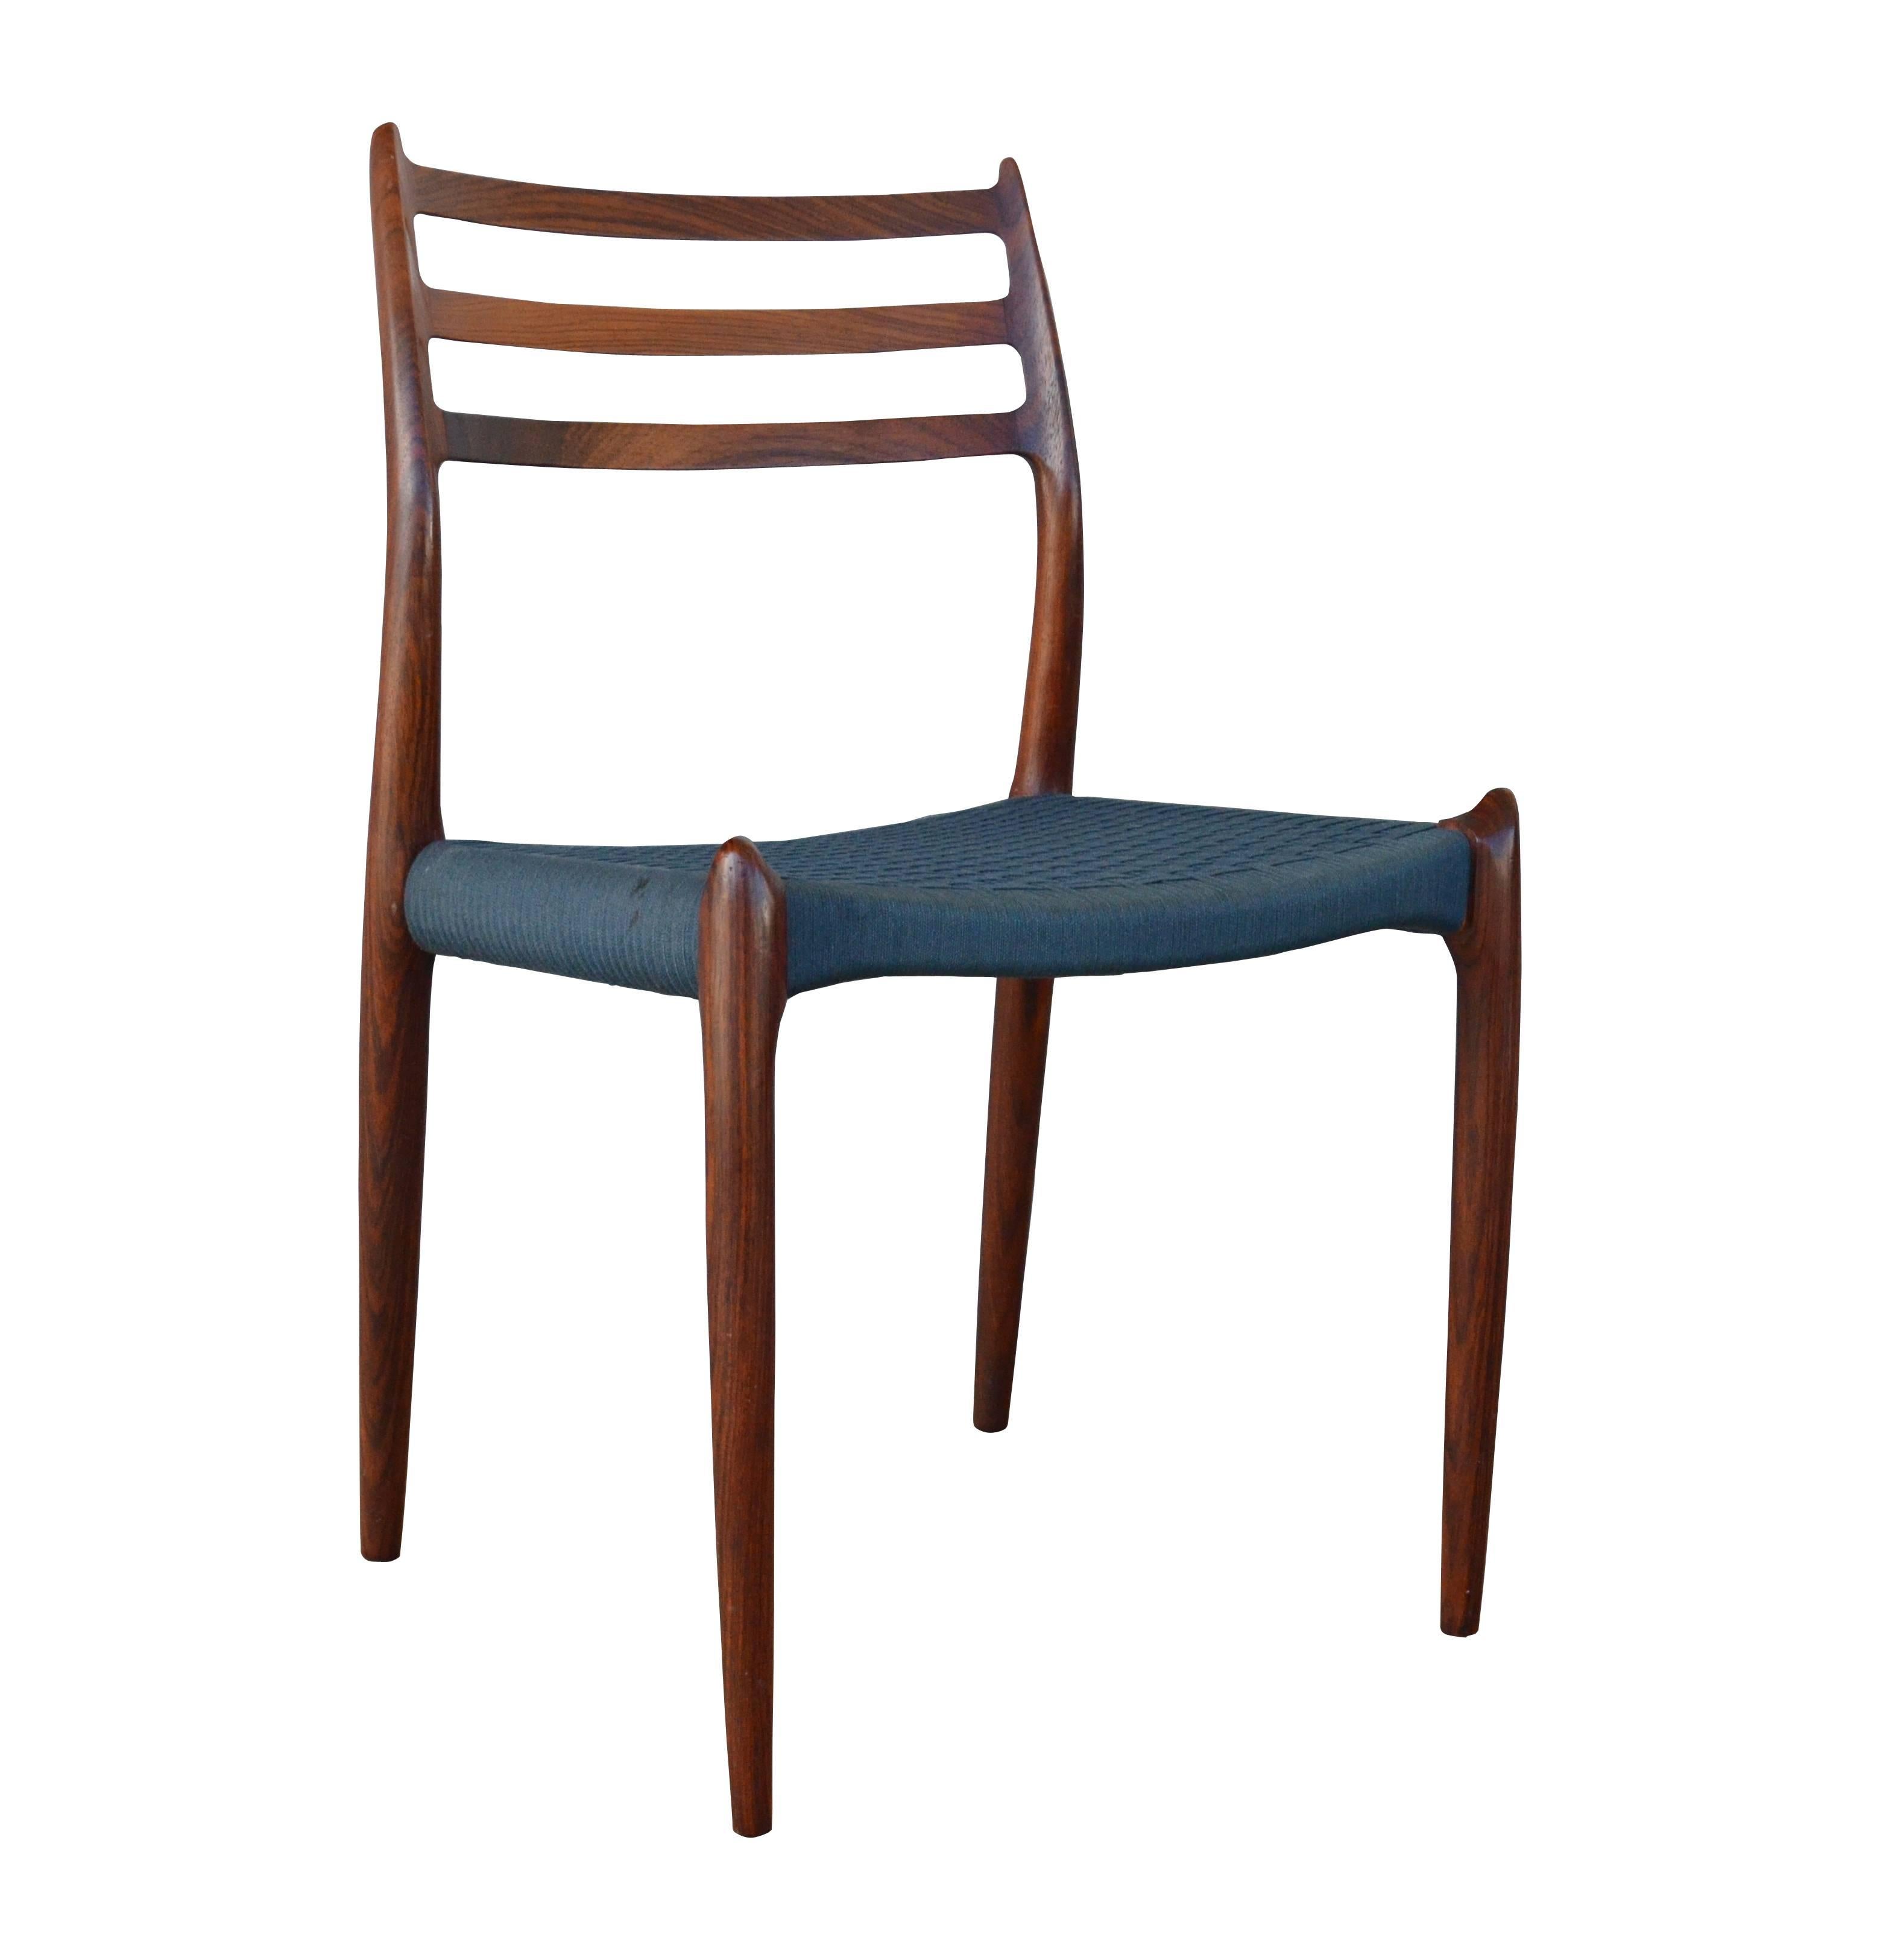 Stunning set of six rosewood dining chairs by Danish master Niels Moller. Chairs are in excellent condition and still retain the original wool cord seats which are a beautiful shade of deep blue/green. This unique color works very well with the